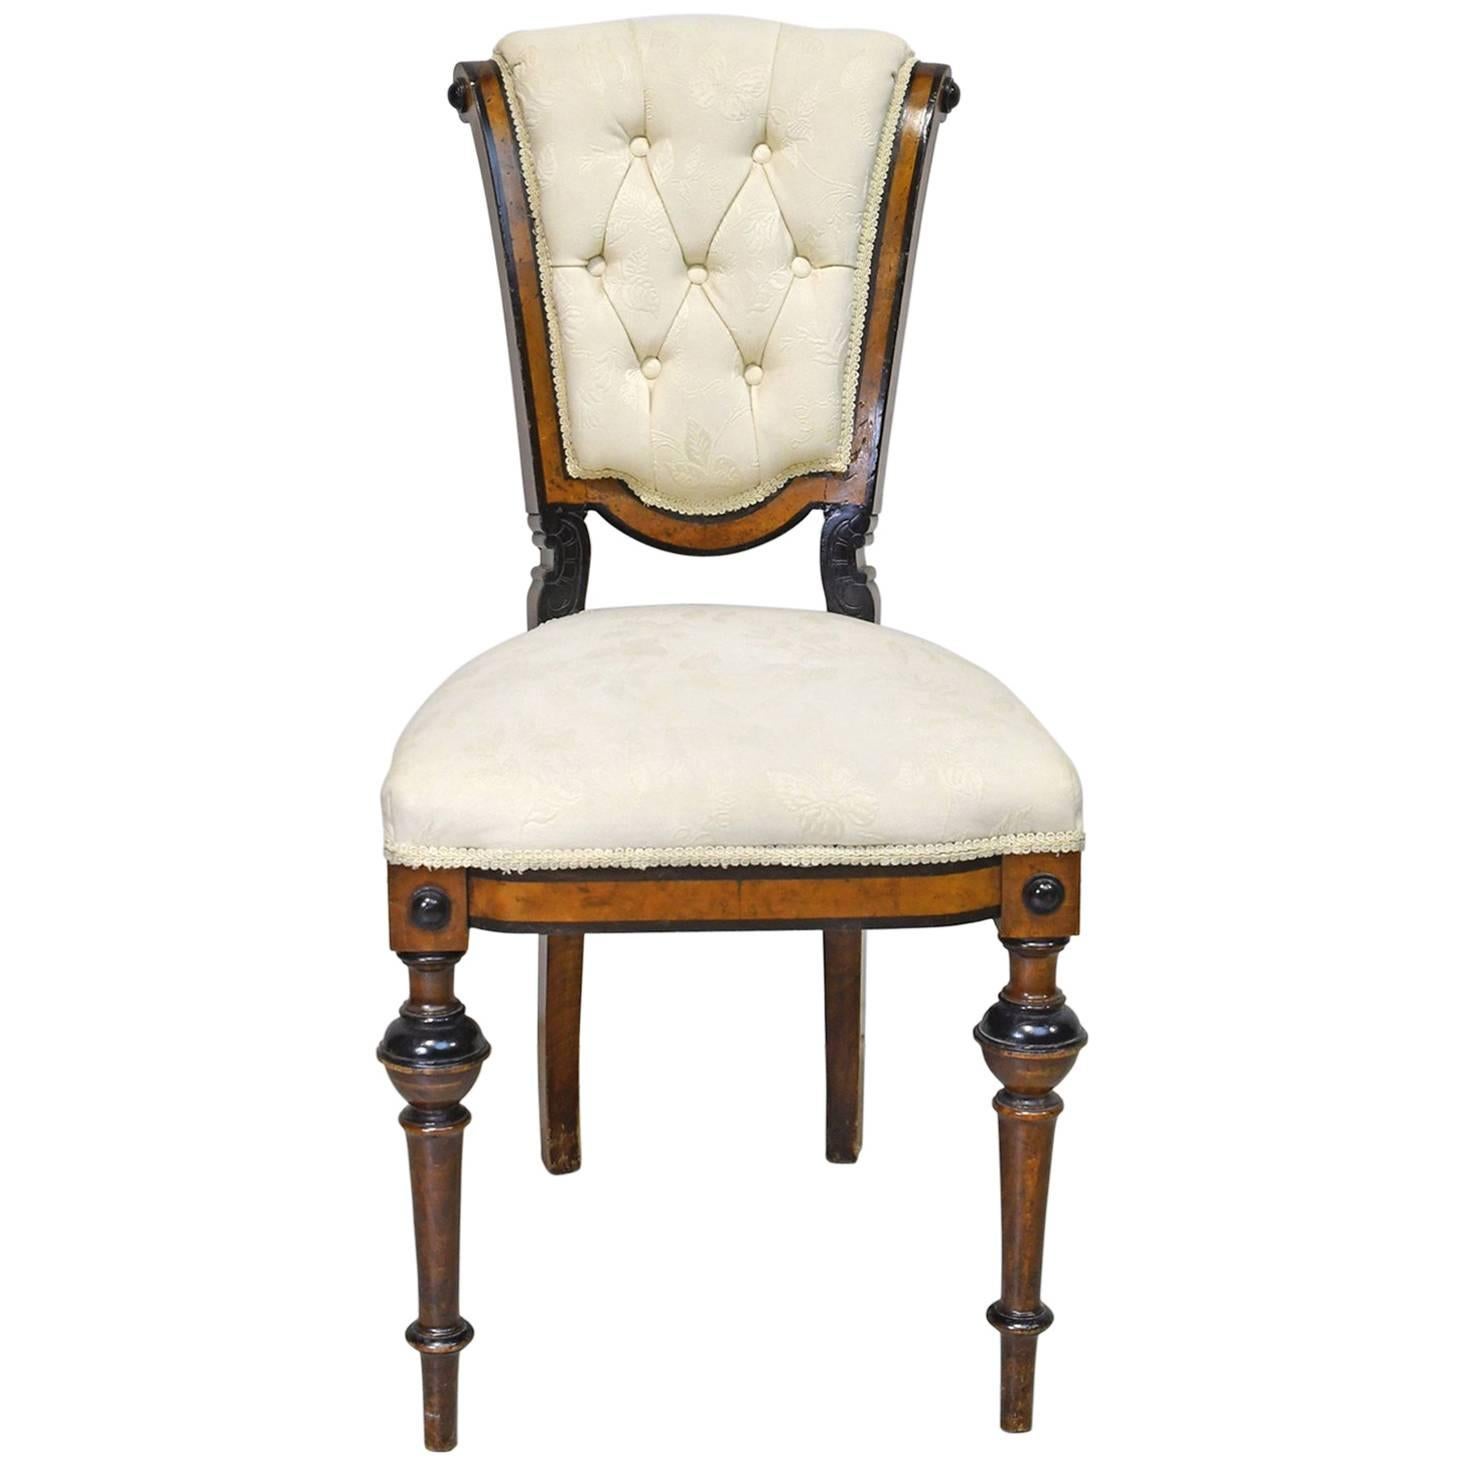 19th Century Walnut Side Chair with Ebonized Bandings, Upholstered Seat and Back